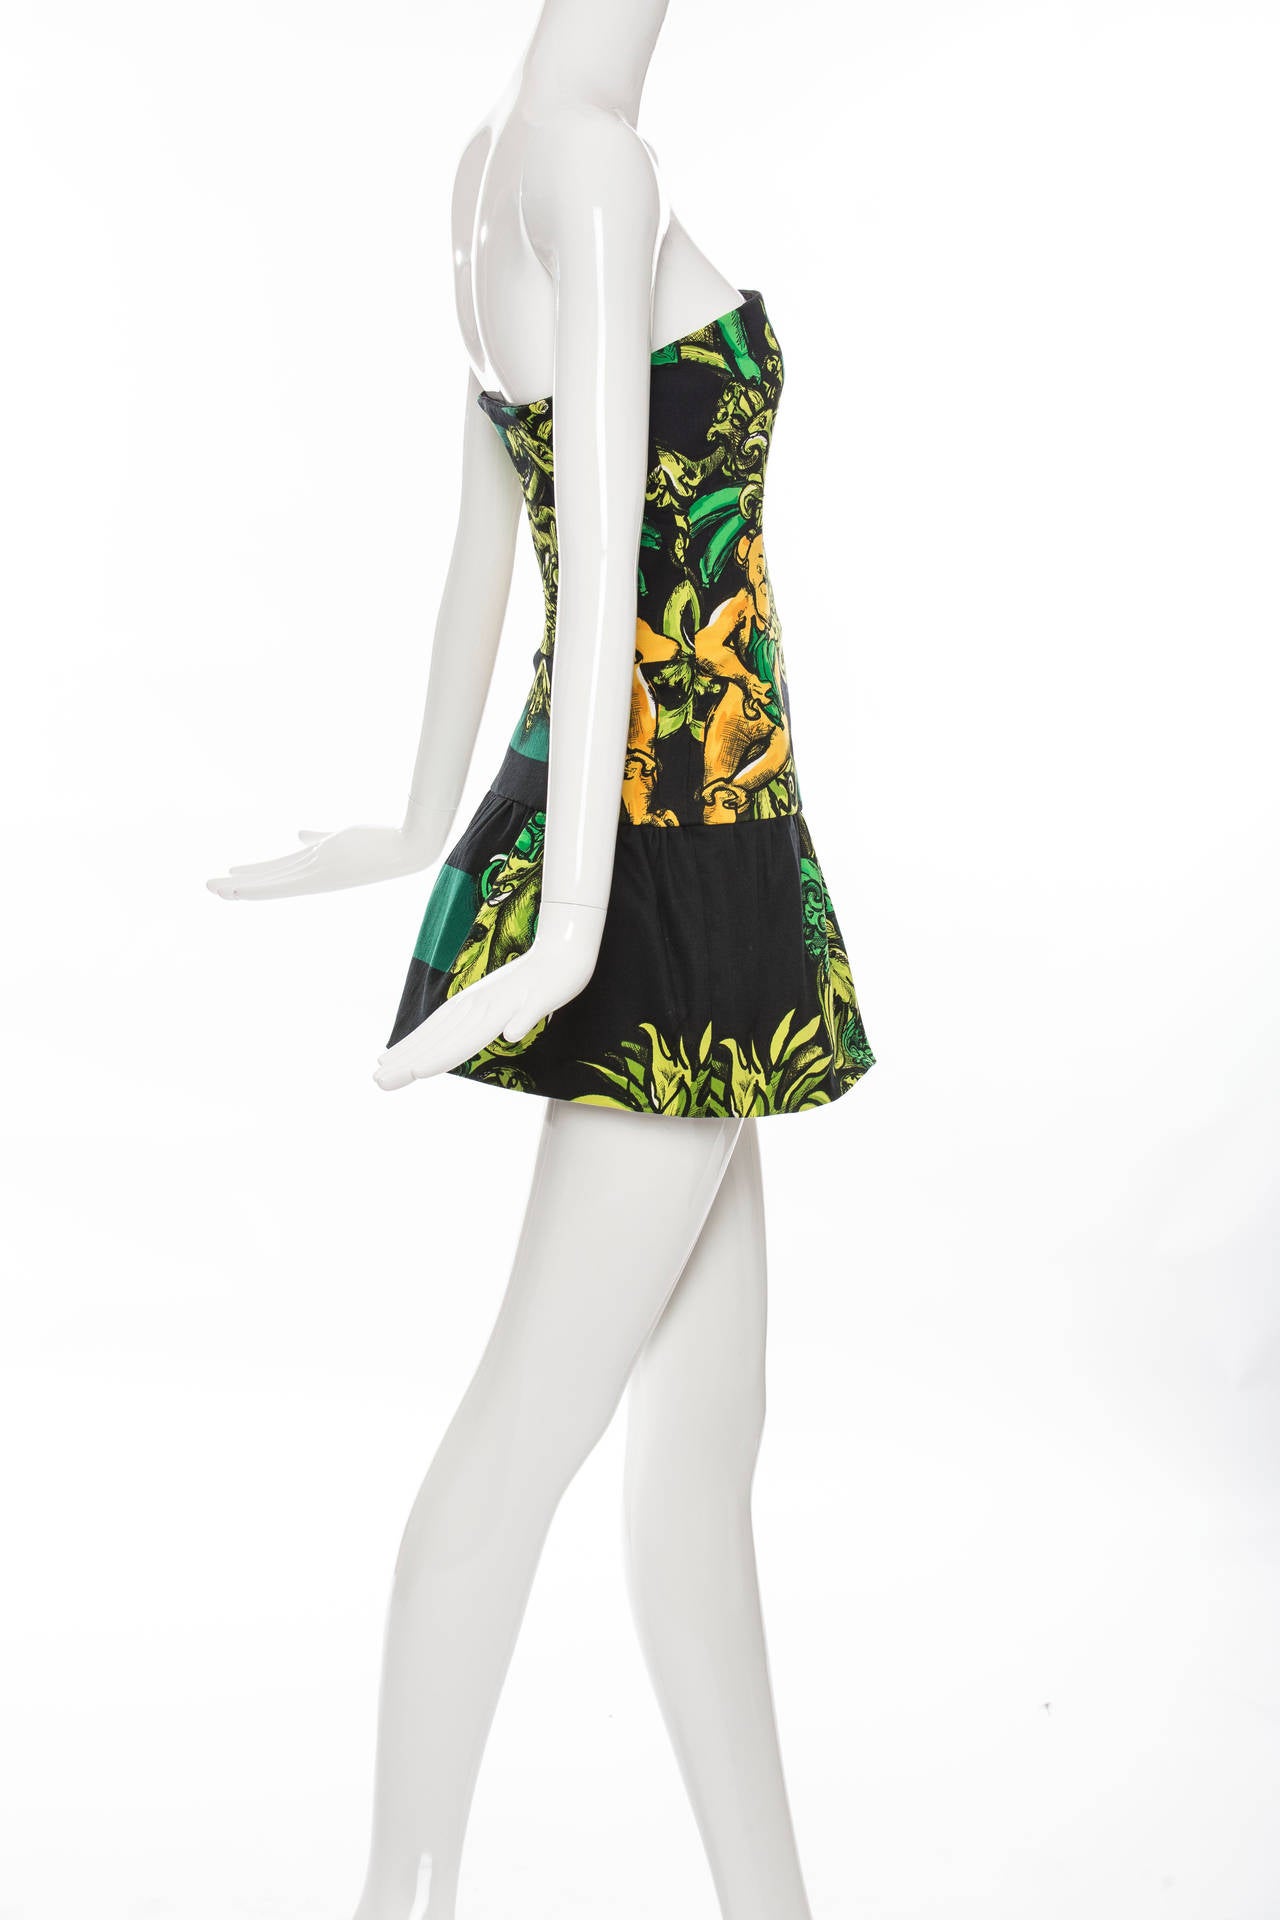 Prada, Spring/Summer 2011 strapless printed dress with structured fit and flare silhouette and side zip closure.